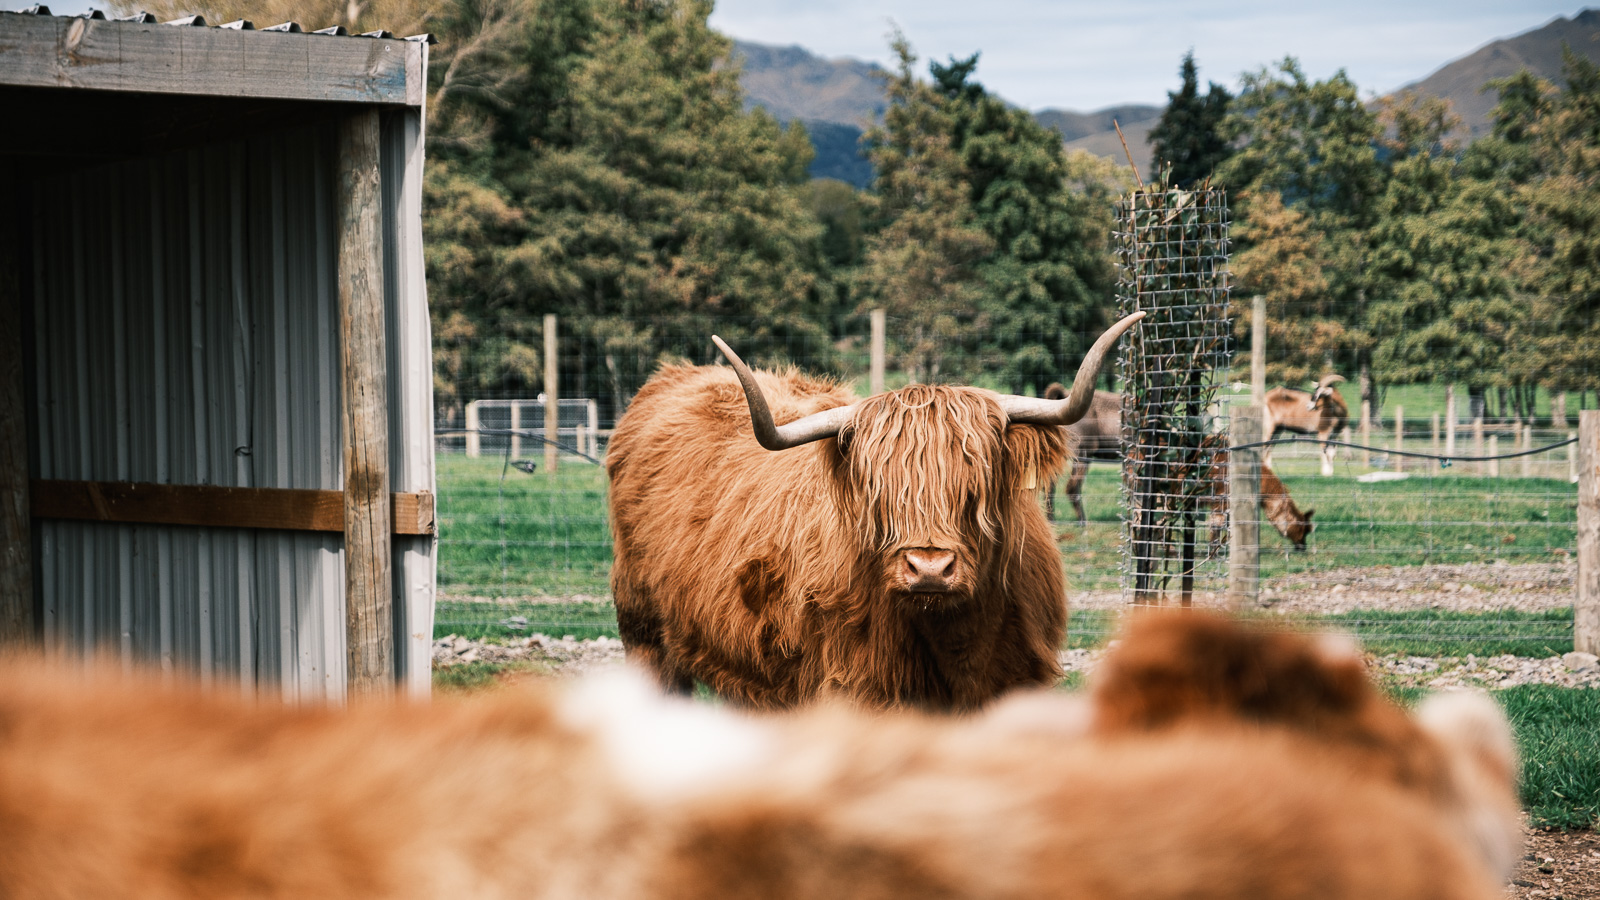 Furry cow in Hamer Springs, New Zealand